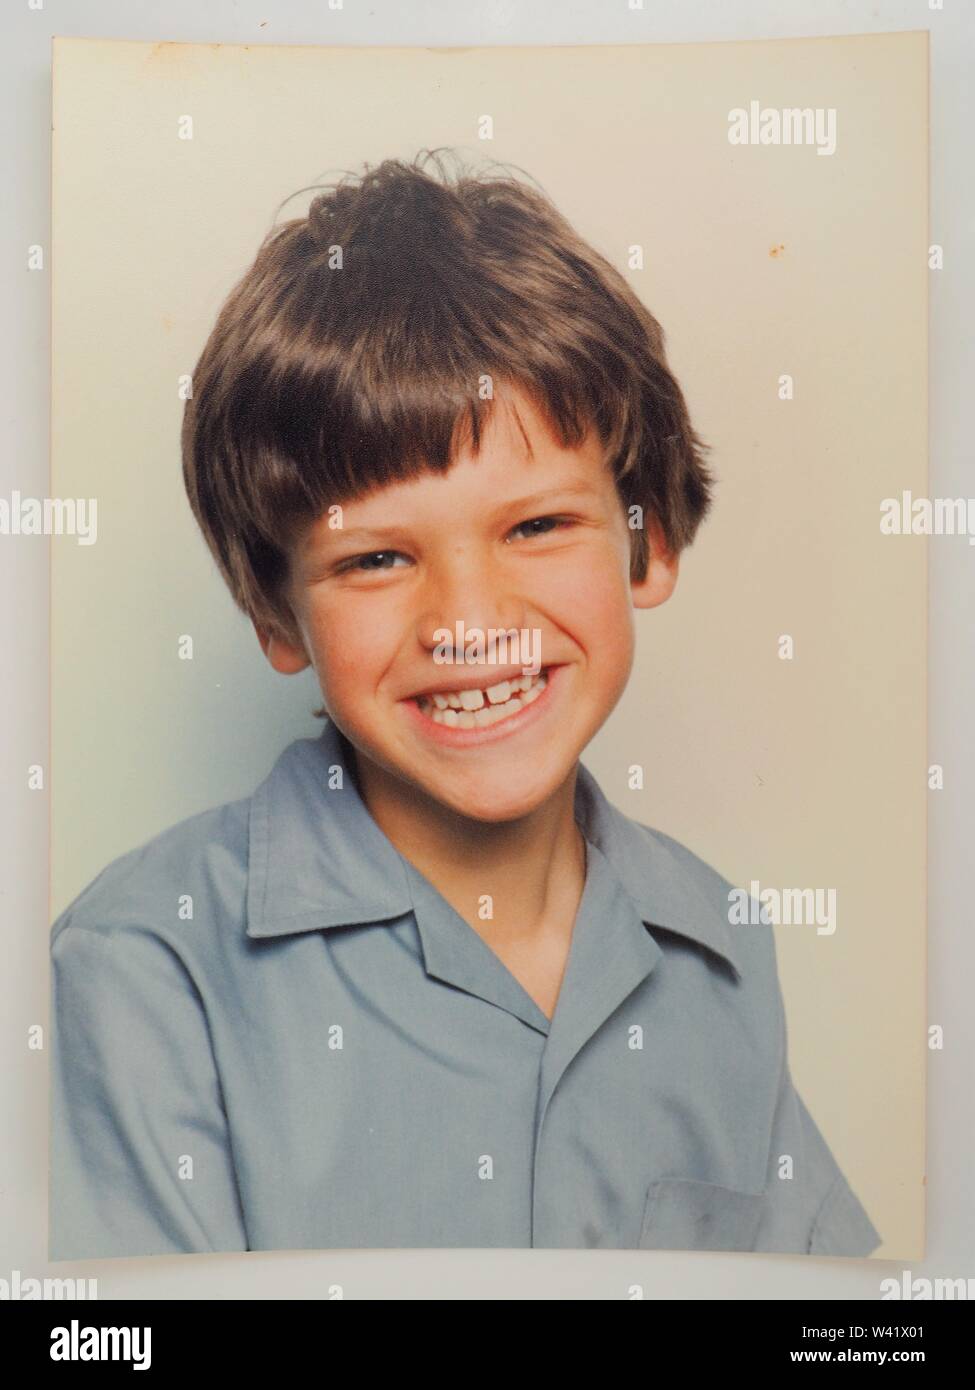 Vintage Image Of School Boy In The 80S Stock Photo - Alamy